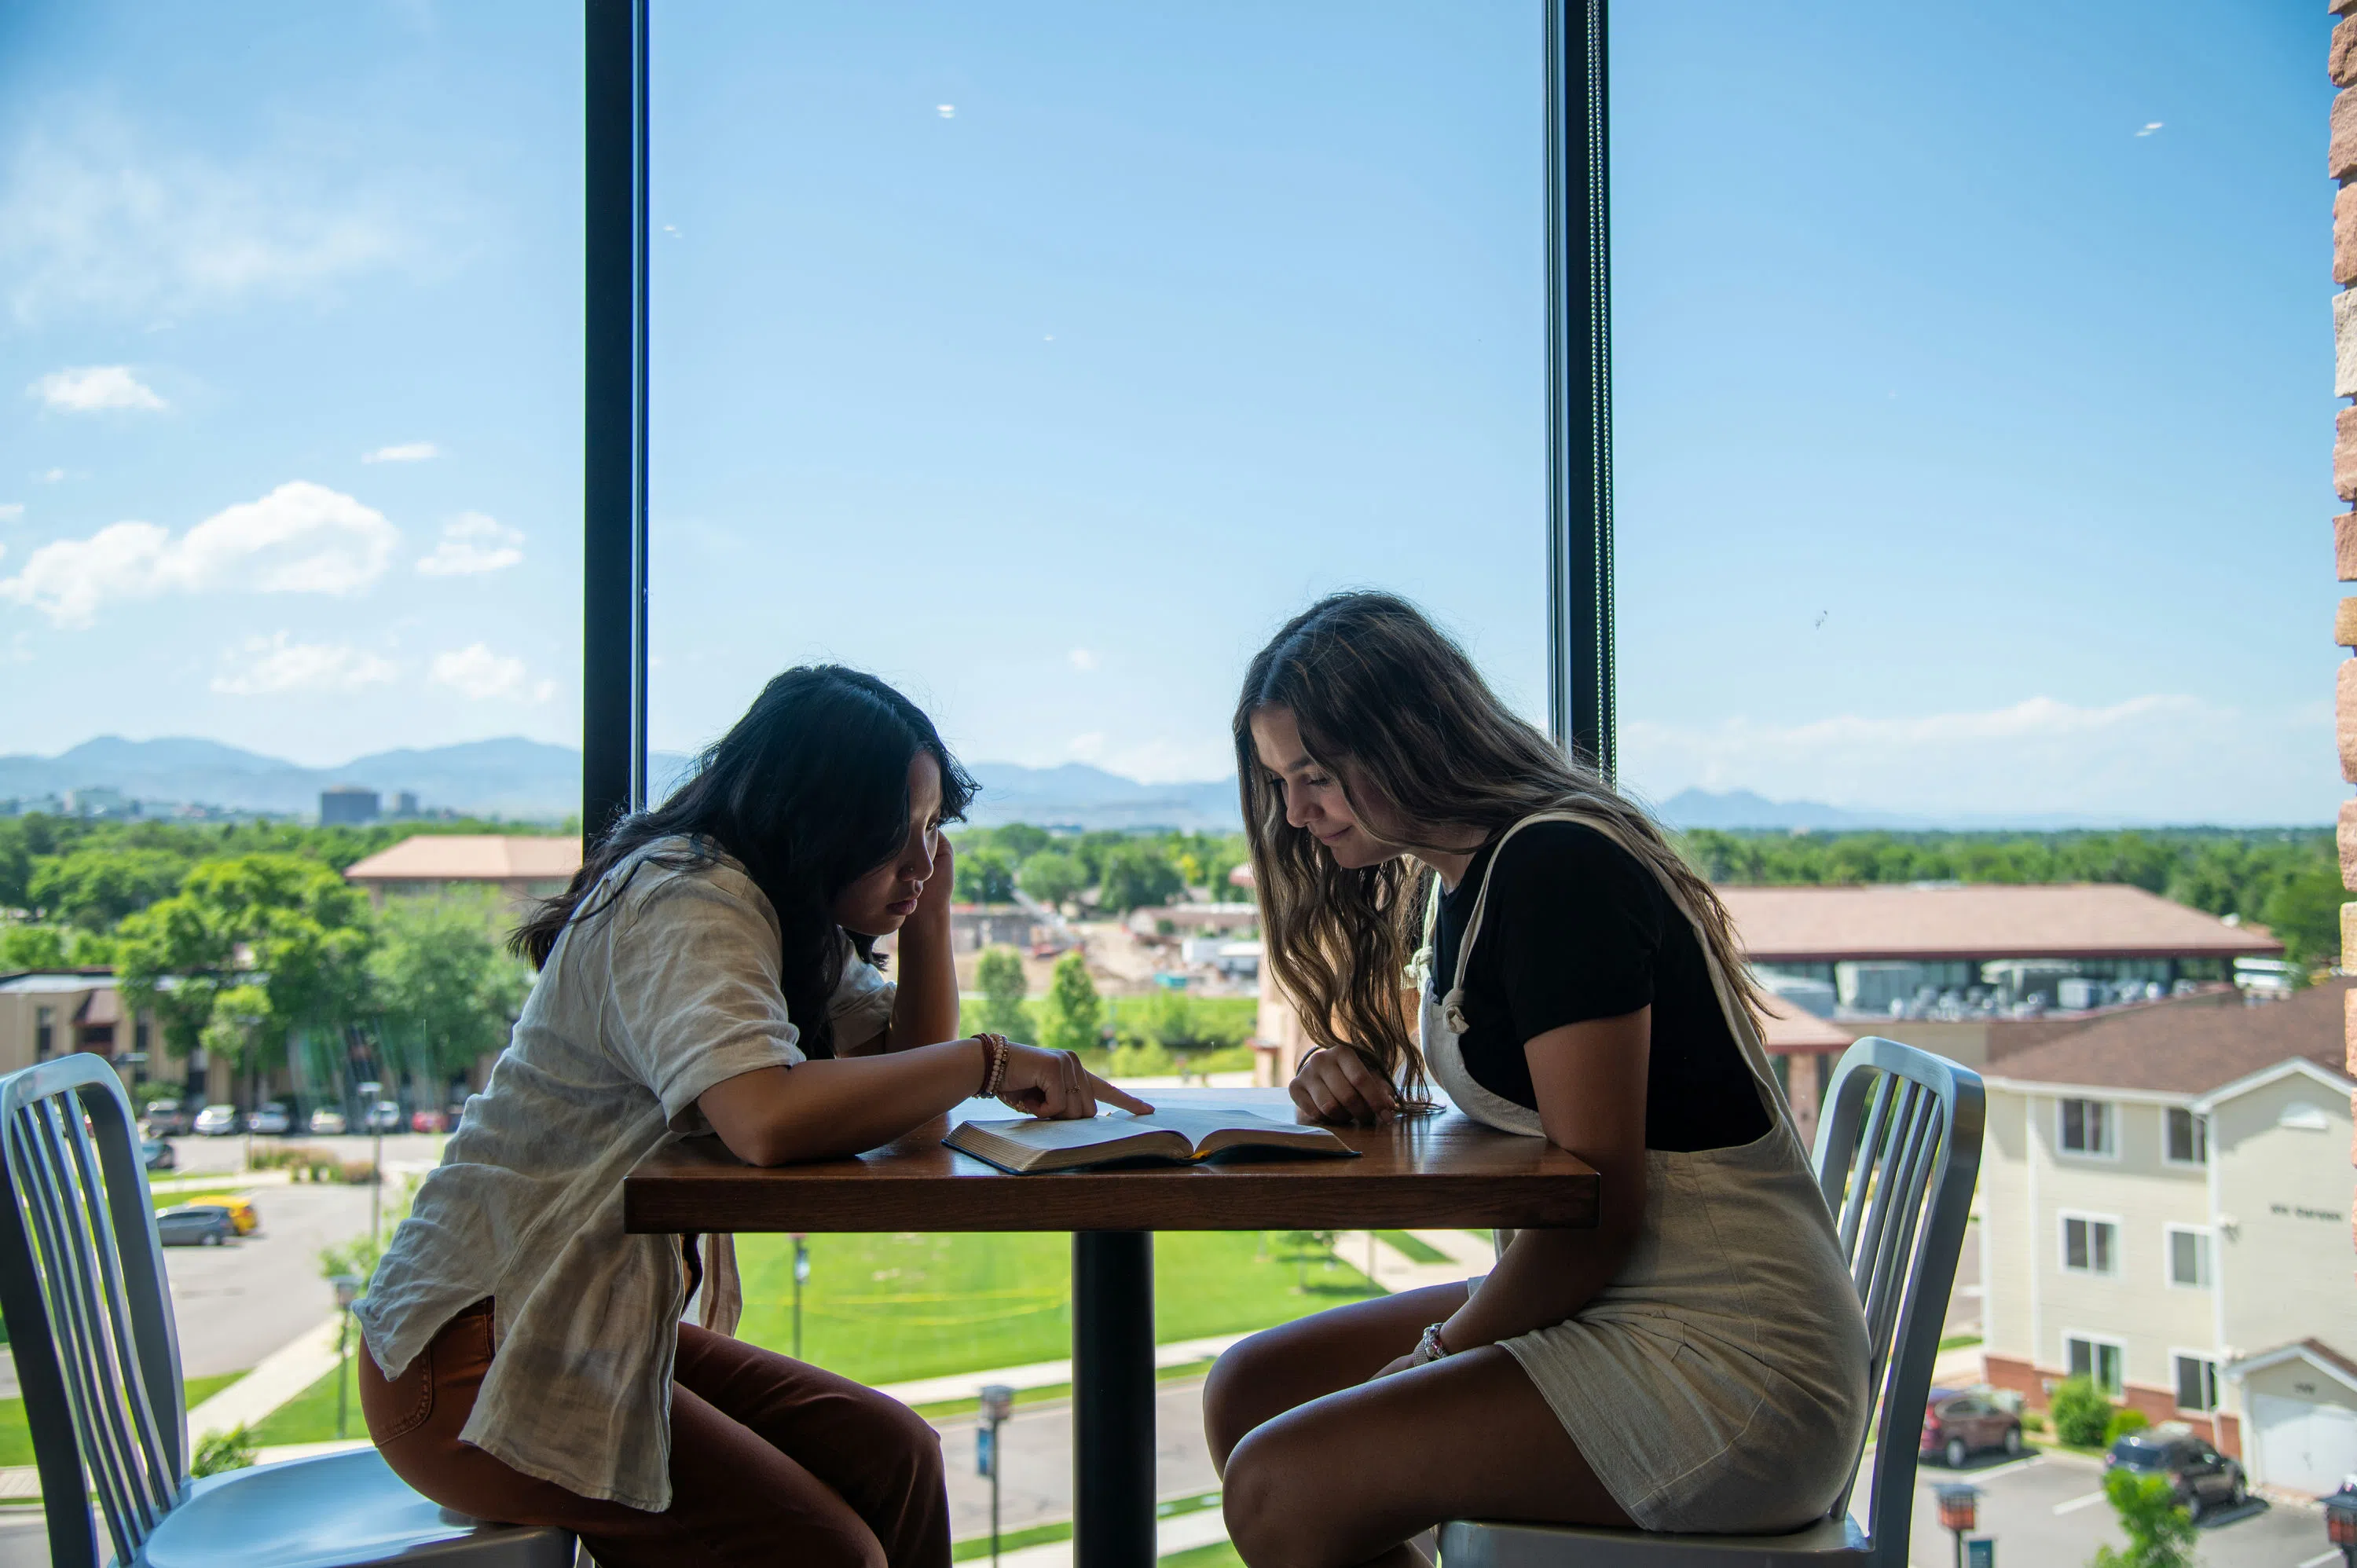 The study rooms are great for catching up with friends or homework with an incredible view of campus.